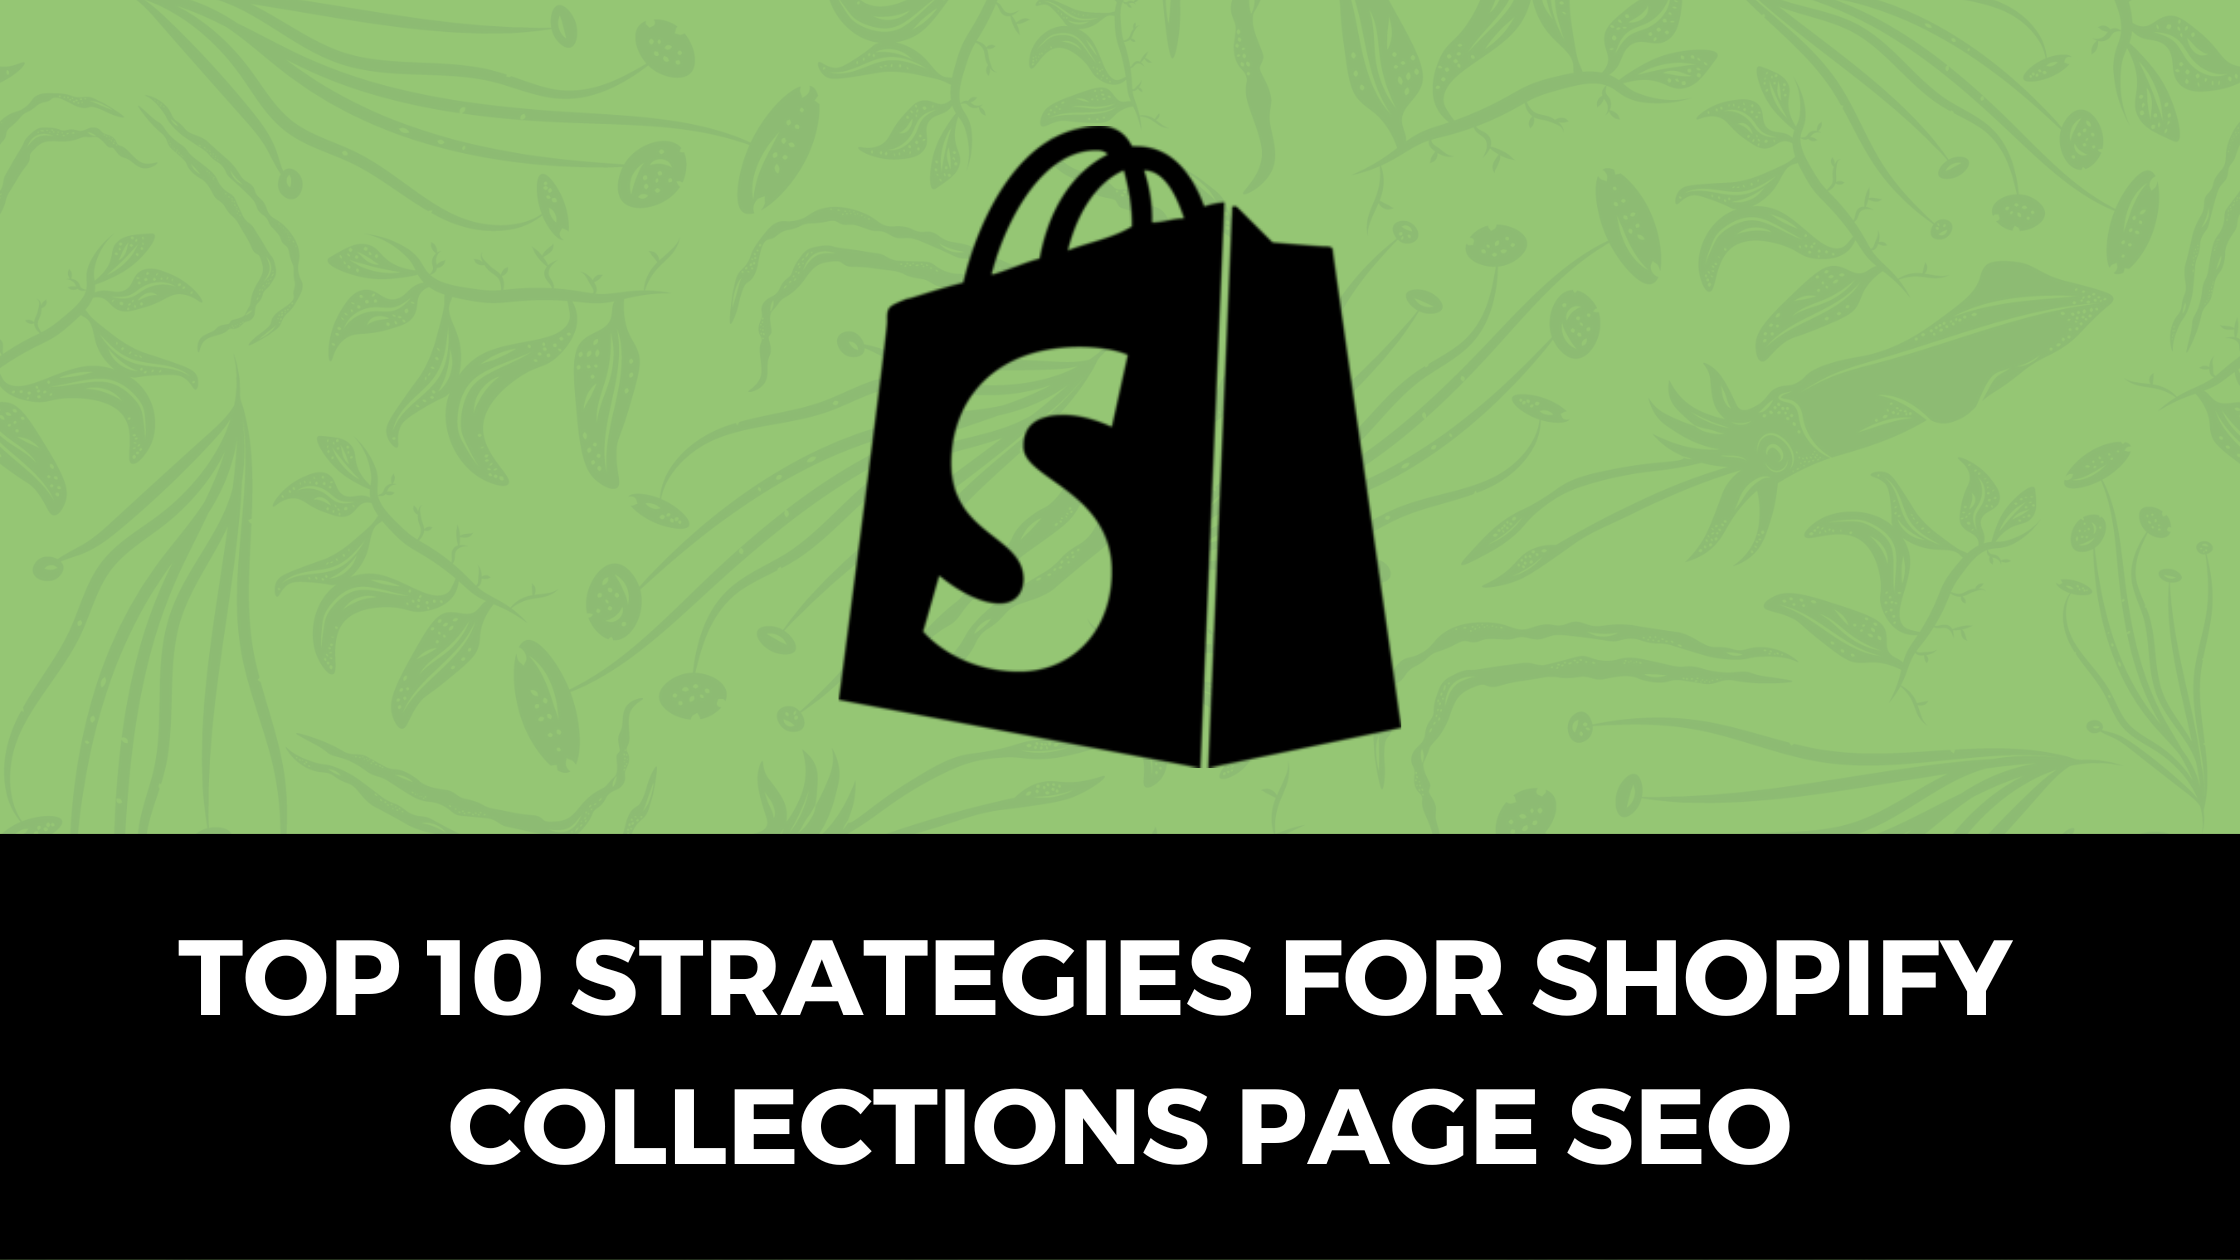 10 Strategies to Make Your Shopify Collection Pages SEO-Friendly